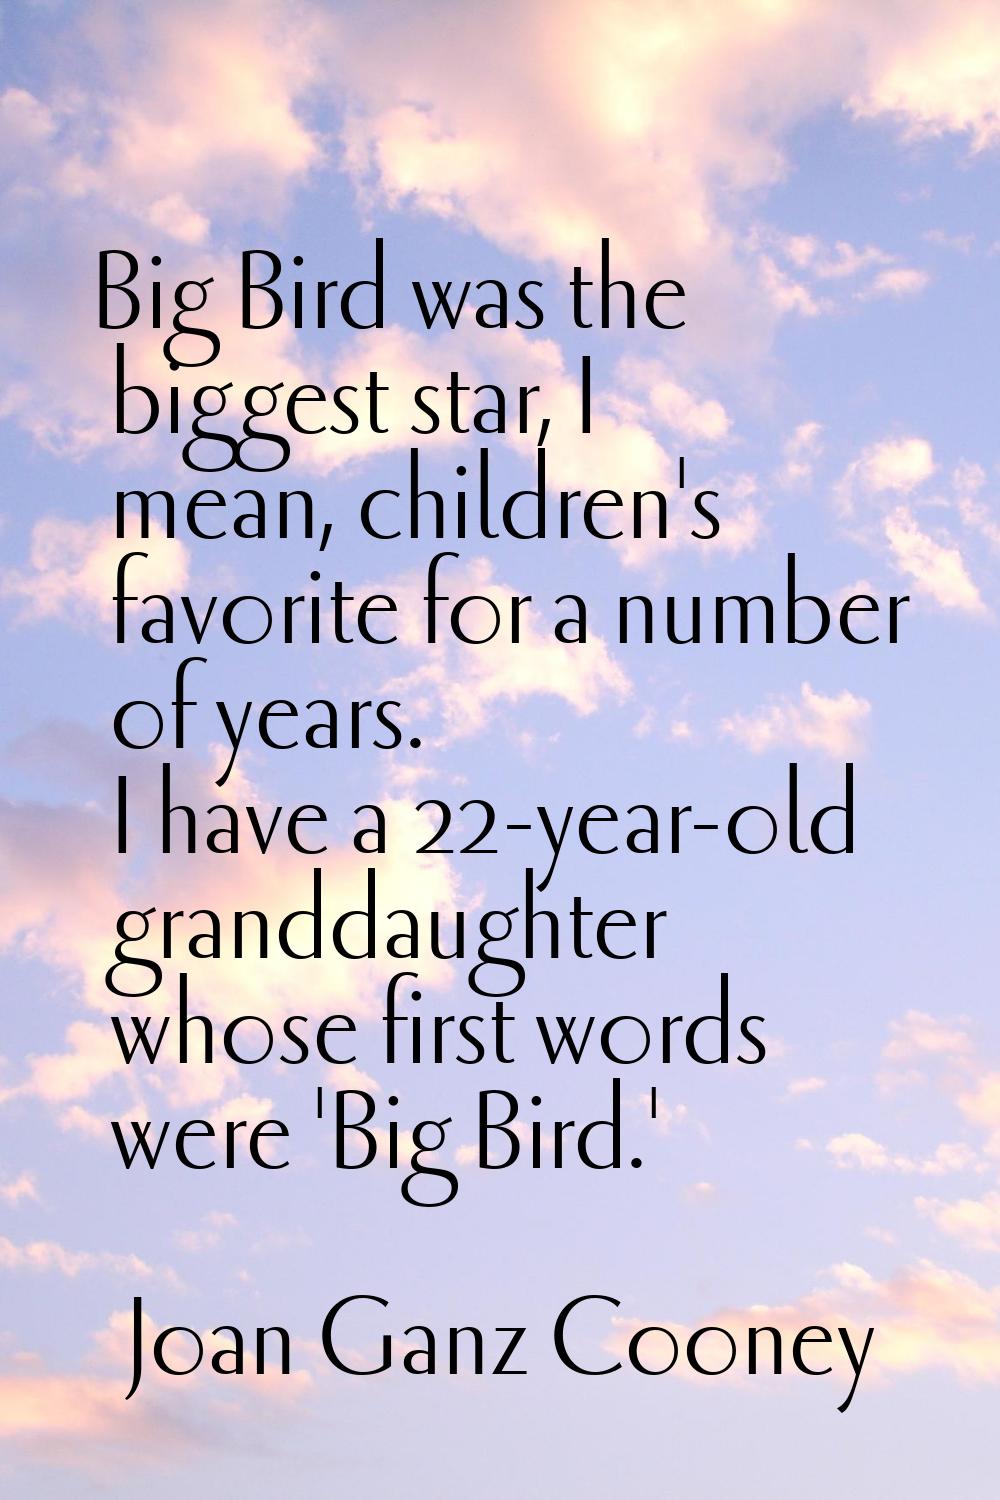 Big Bird was the biggest star, I mean, children's favorite for a number of years. I have a 22-year-